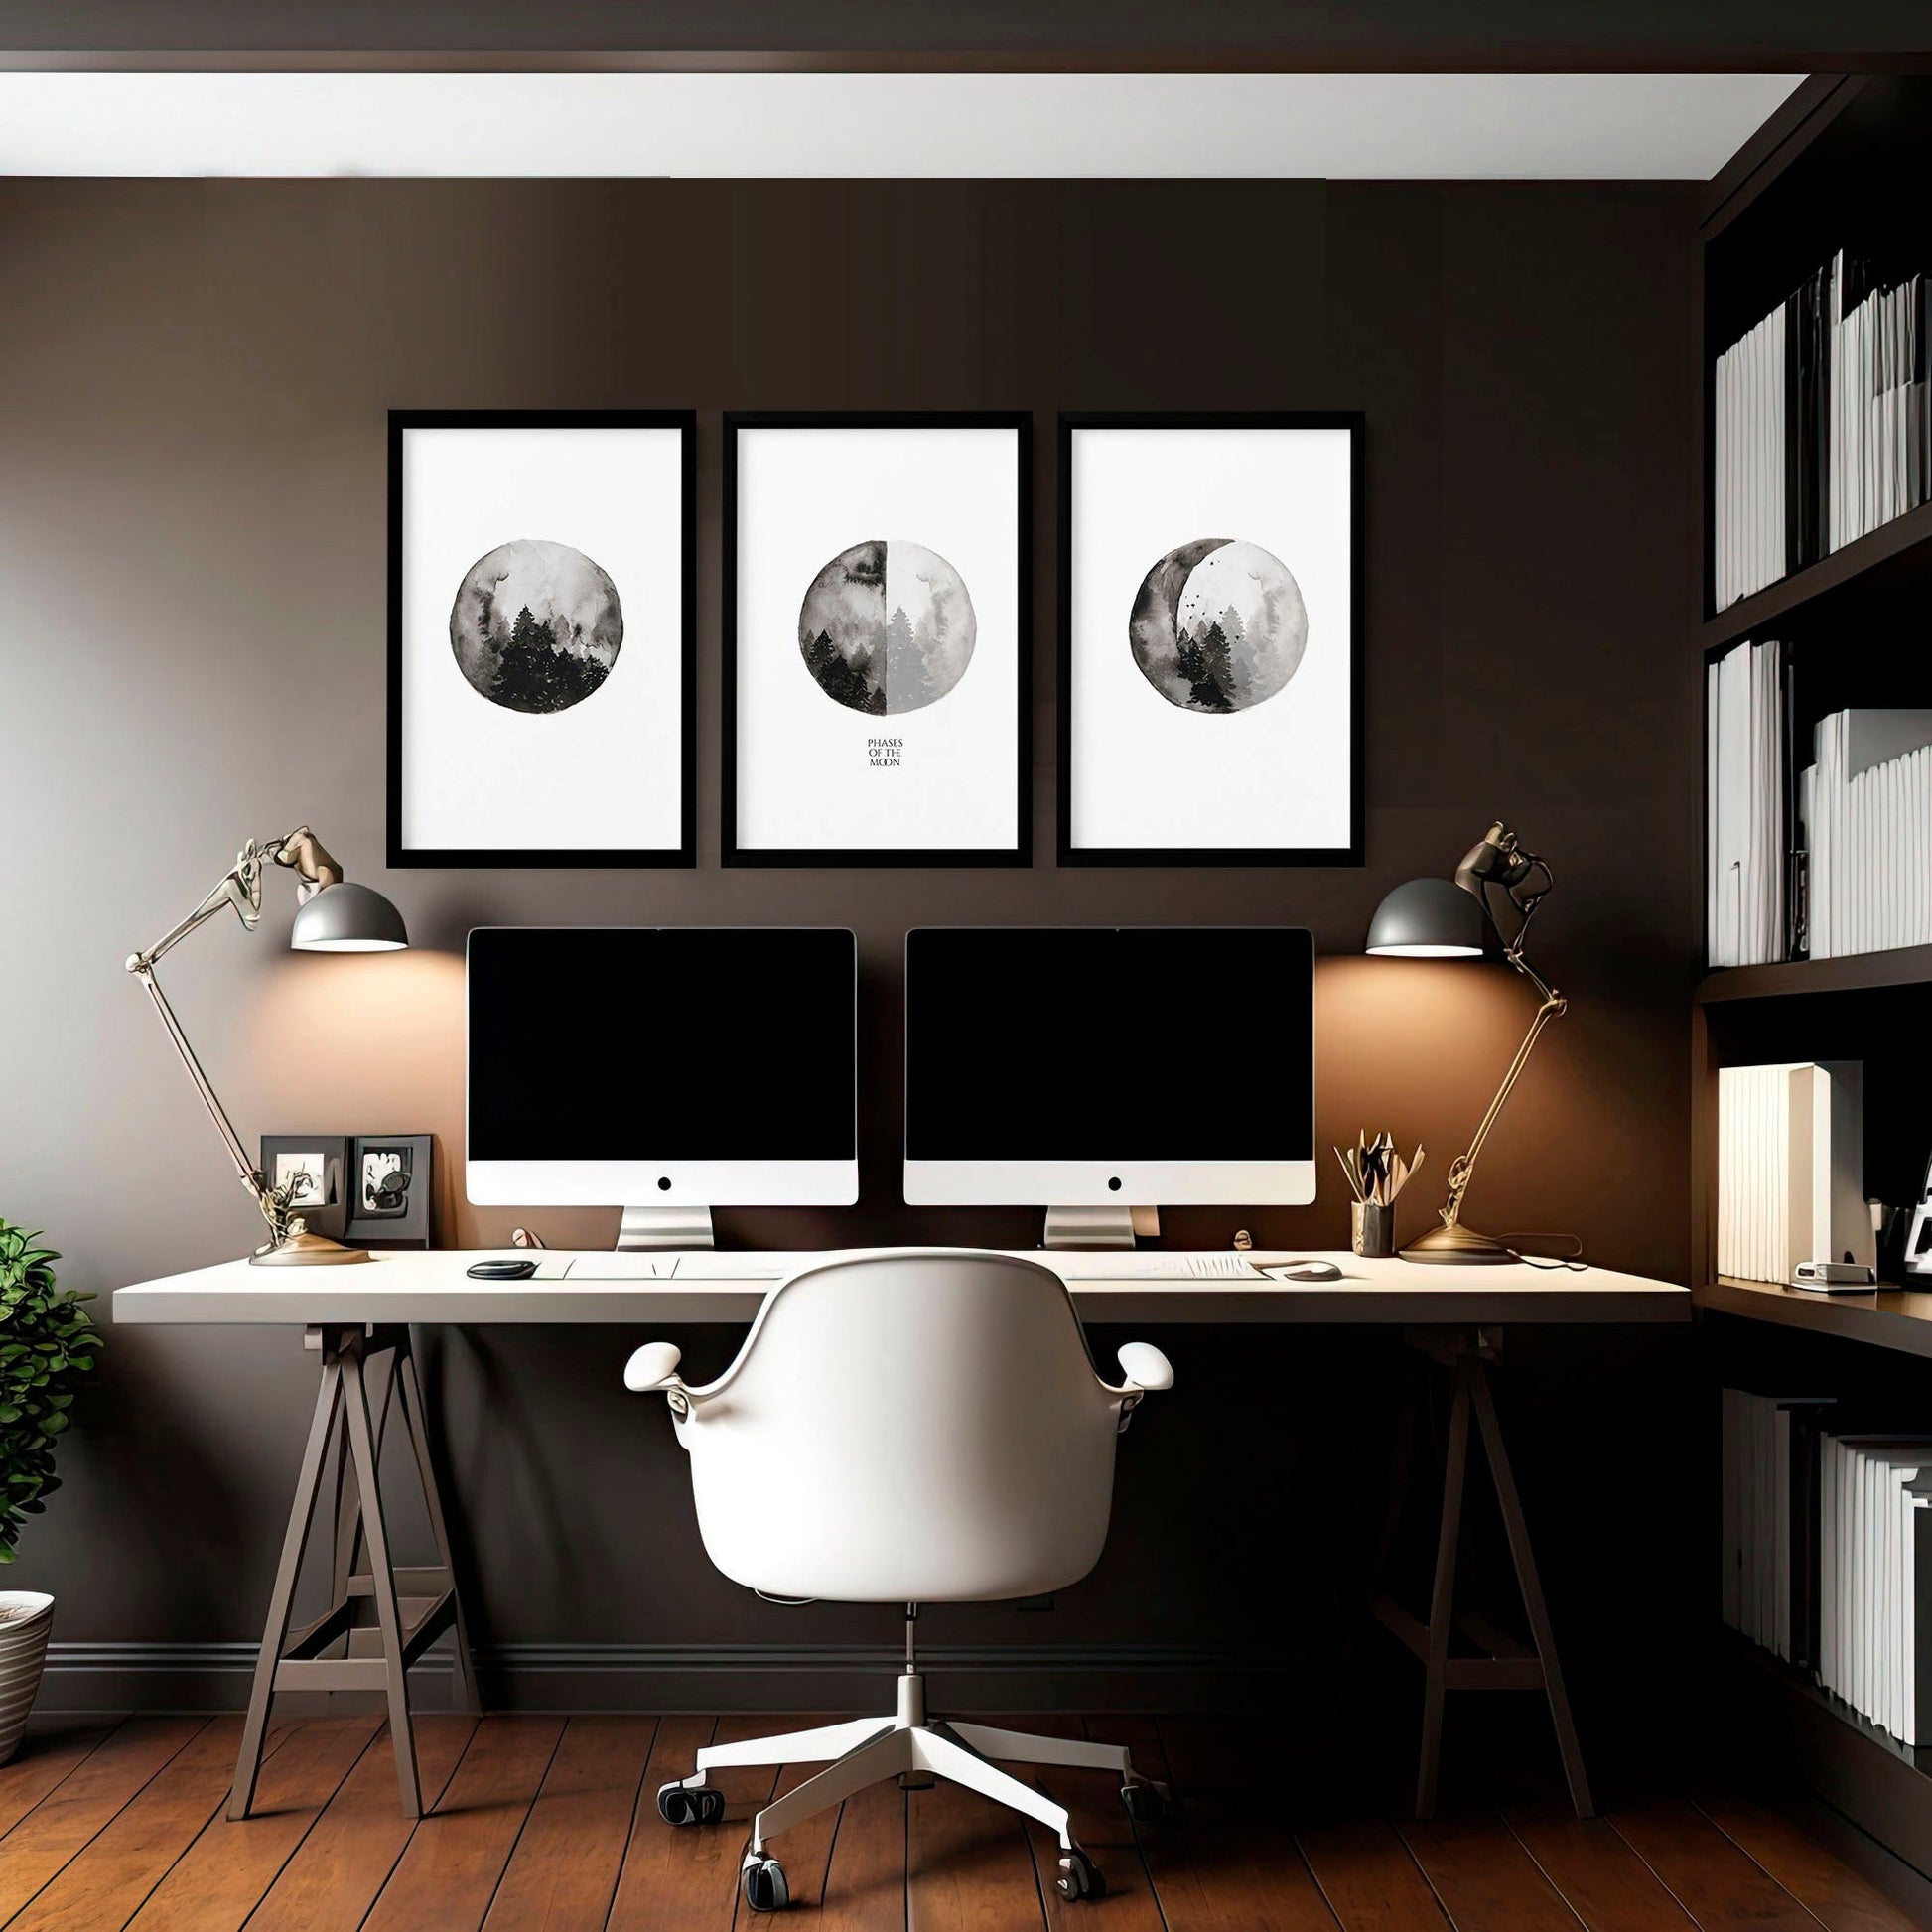 Moon phases wall art | Home office decor set of 3 prints